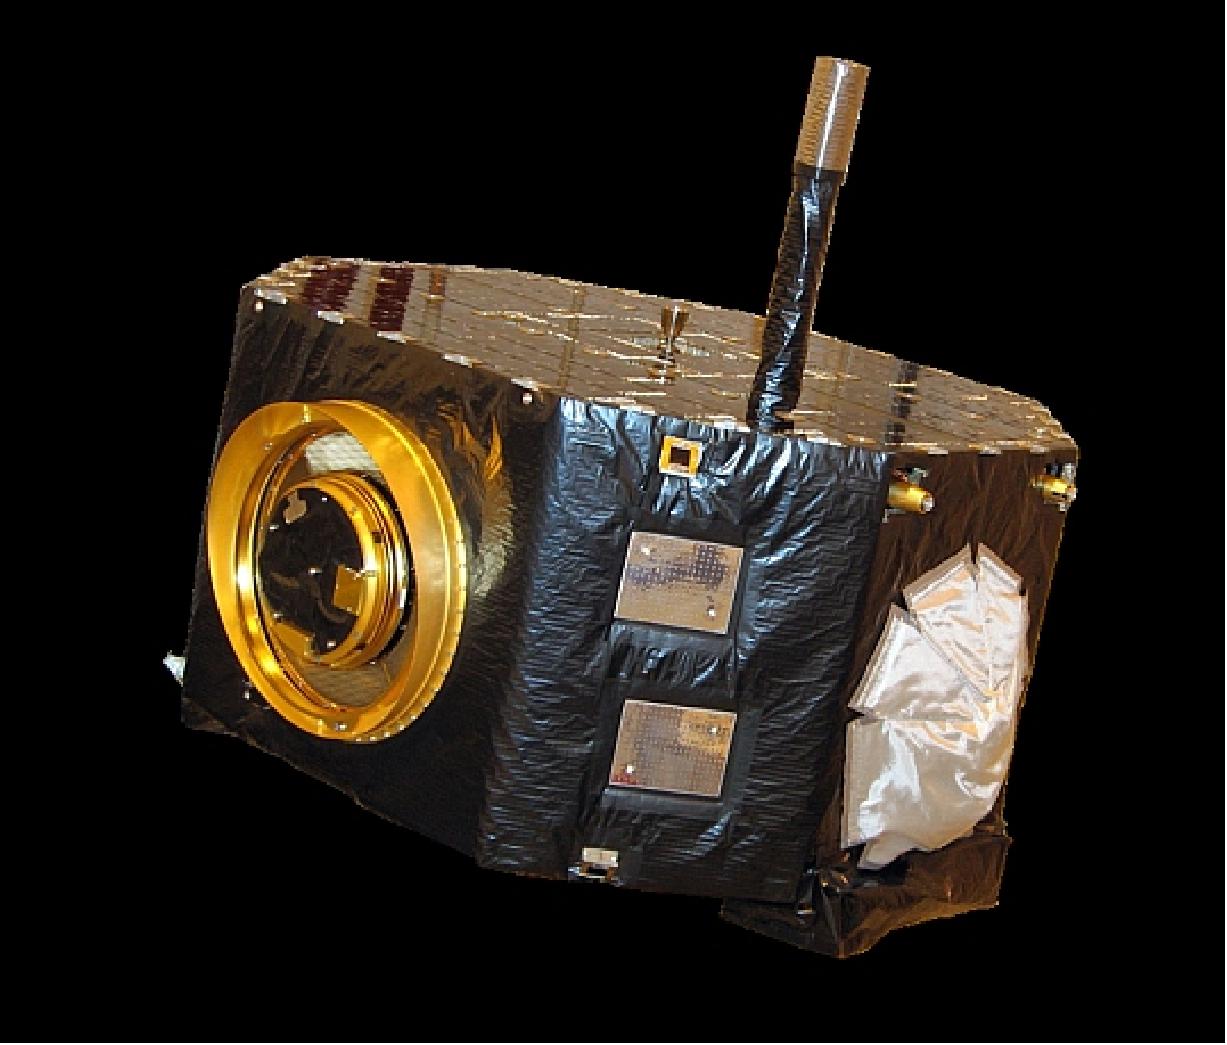 Figure 9: Photo of the IBEX spacecraft with the exposed IBEX-Lo sensor on the left (image credit: OSC)